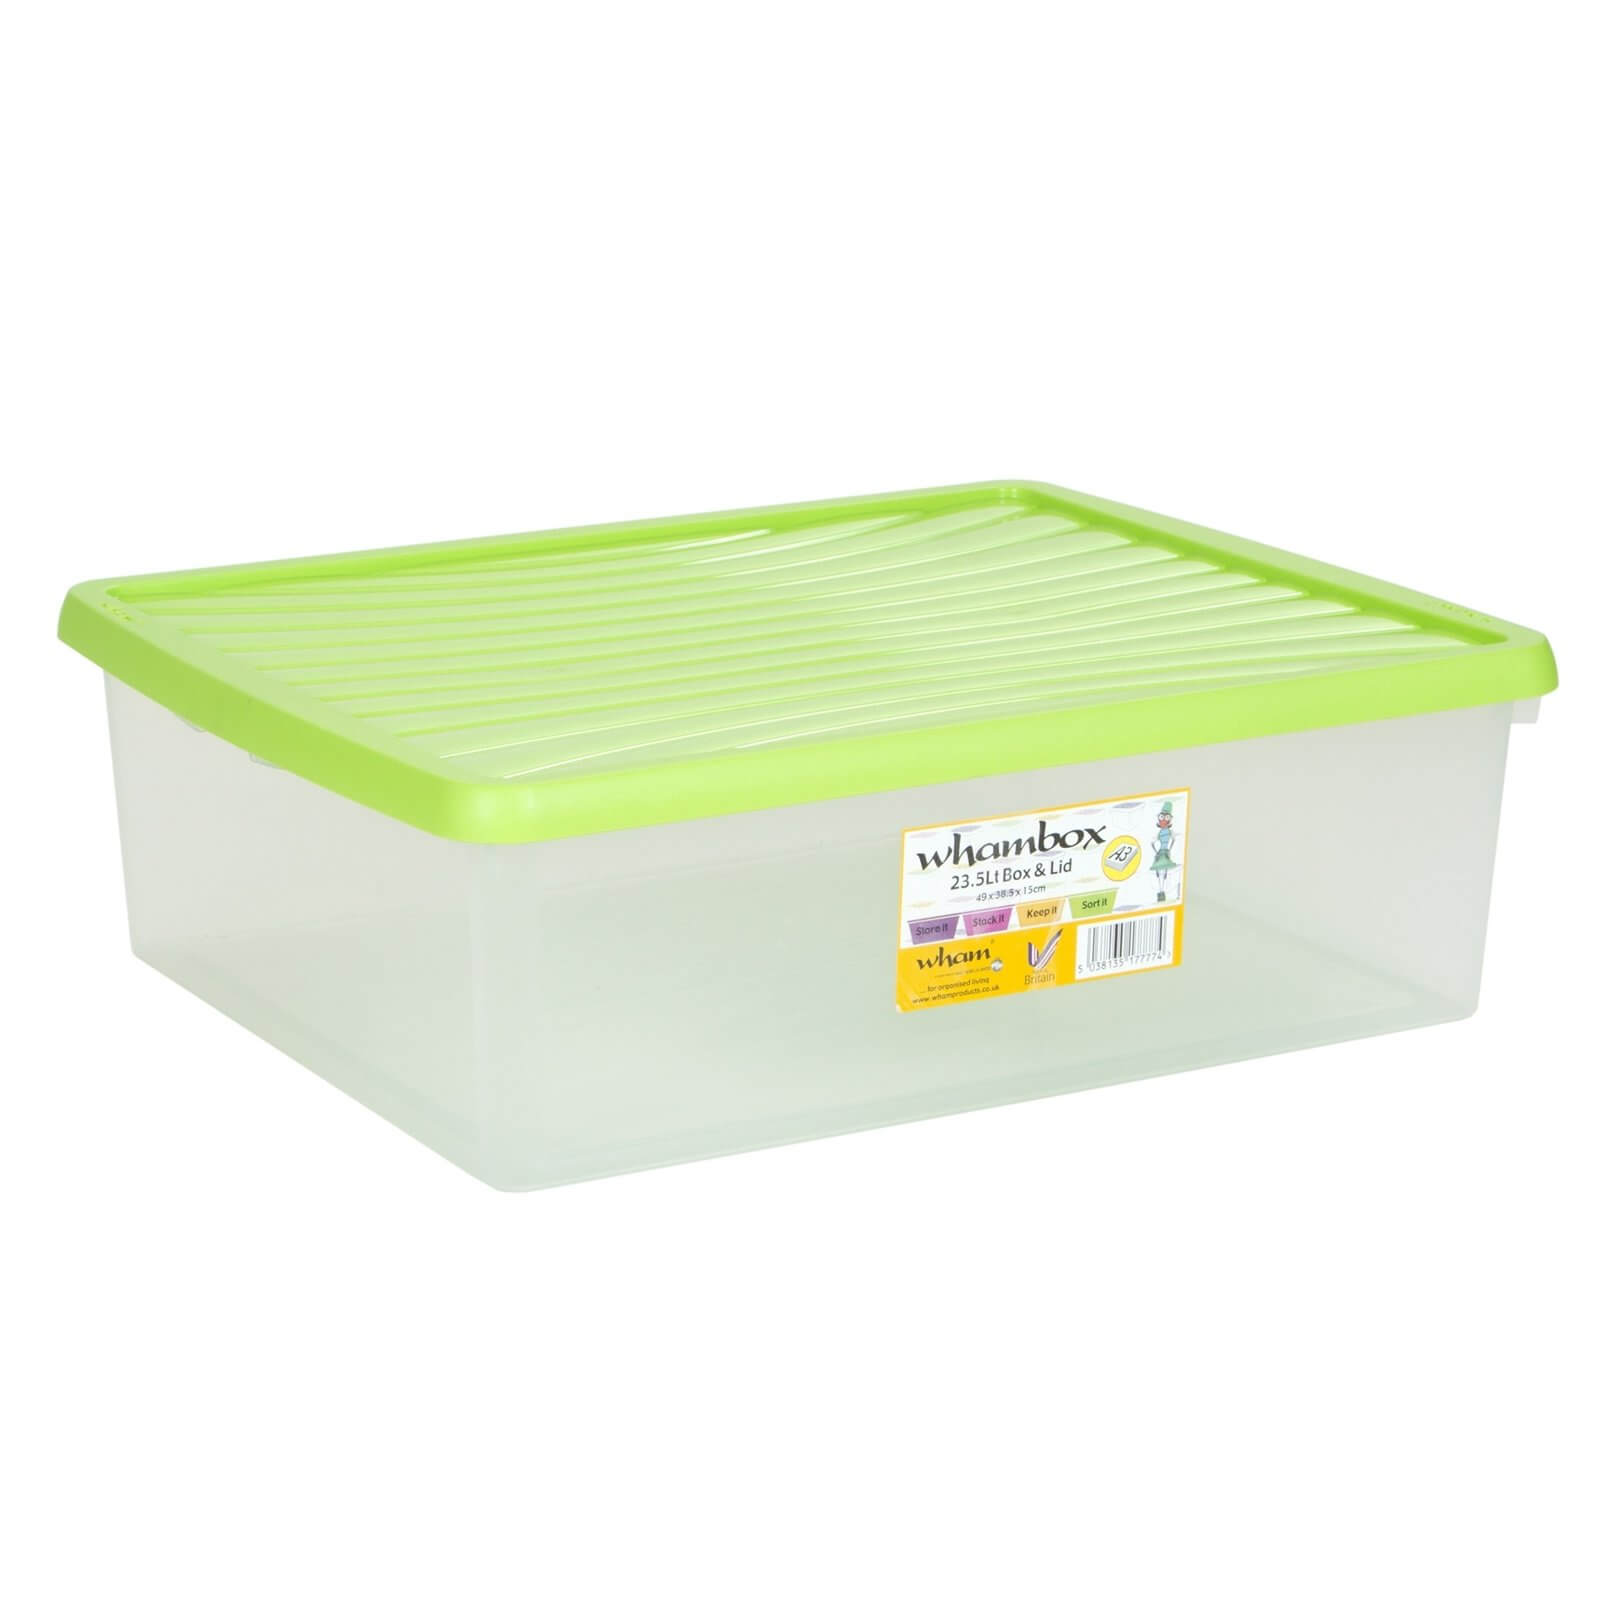 Wham 23L Storage Box and Lime Green Lid